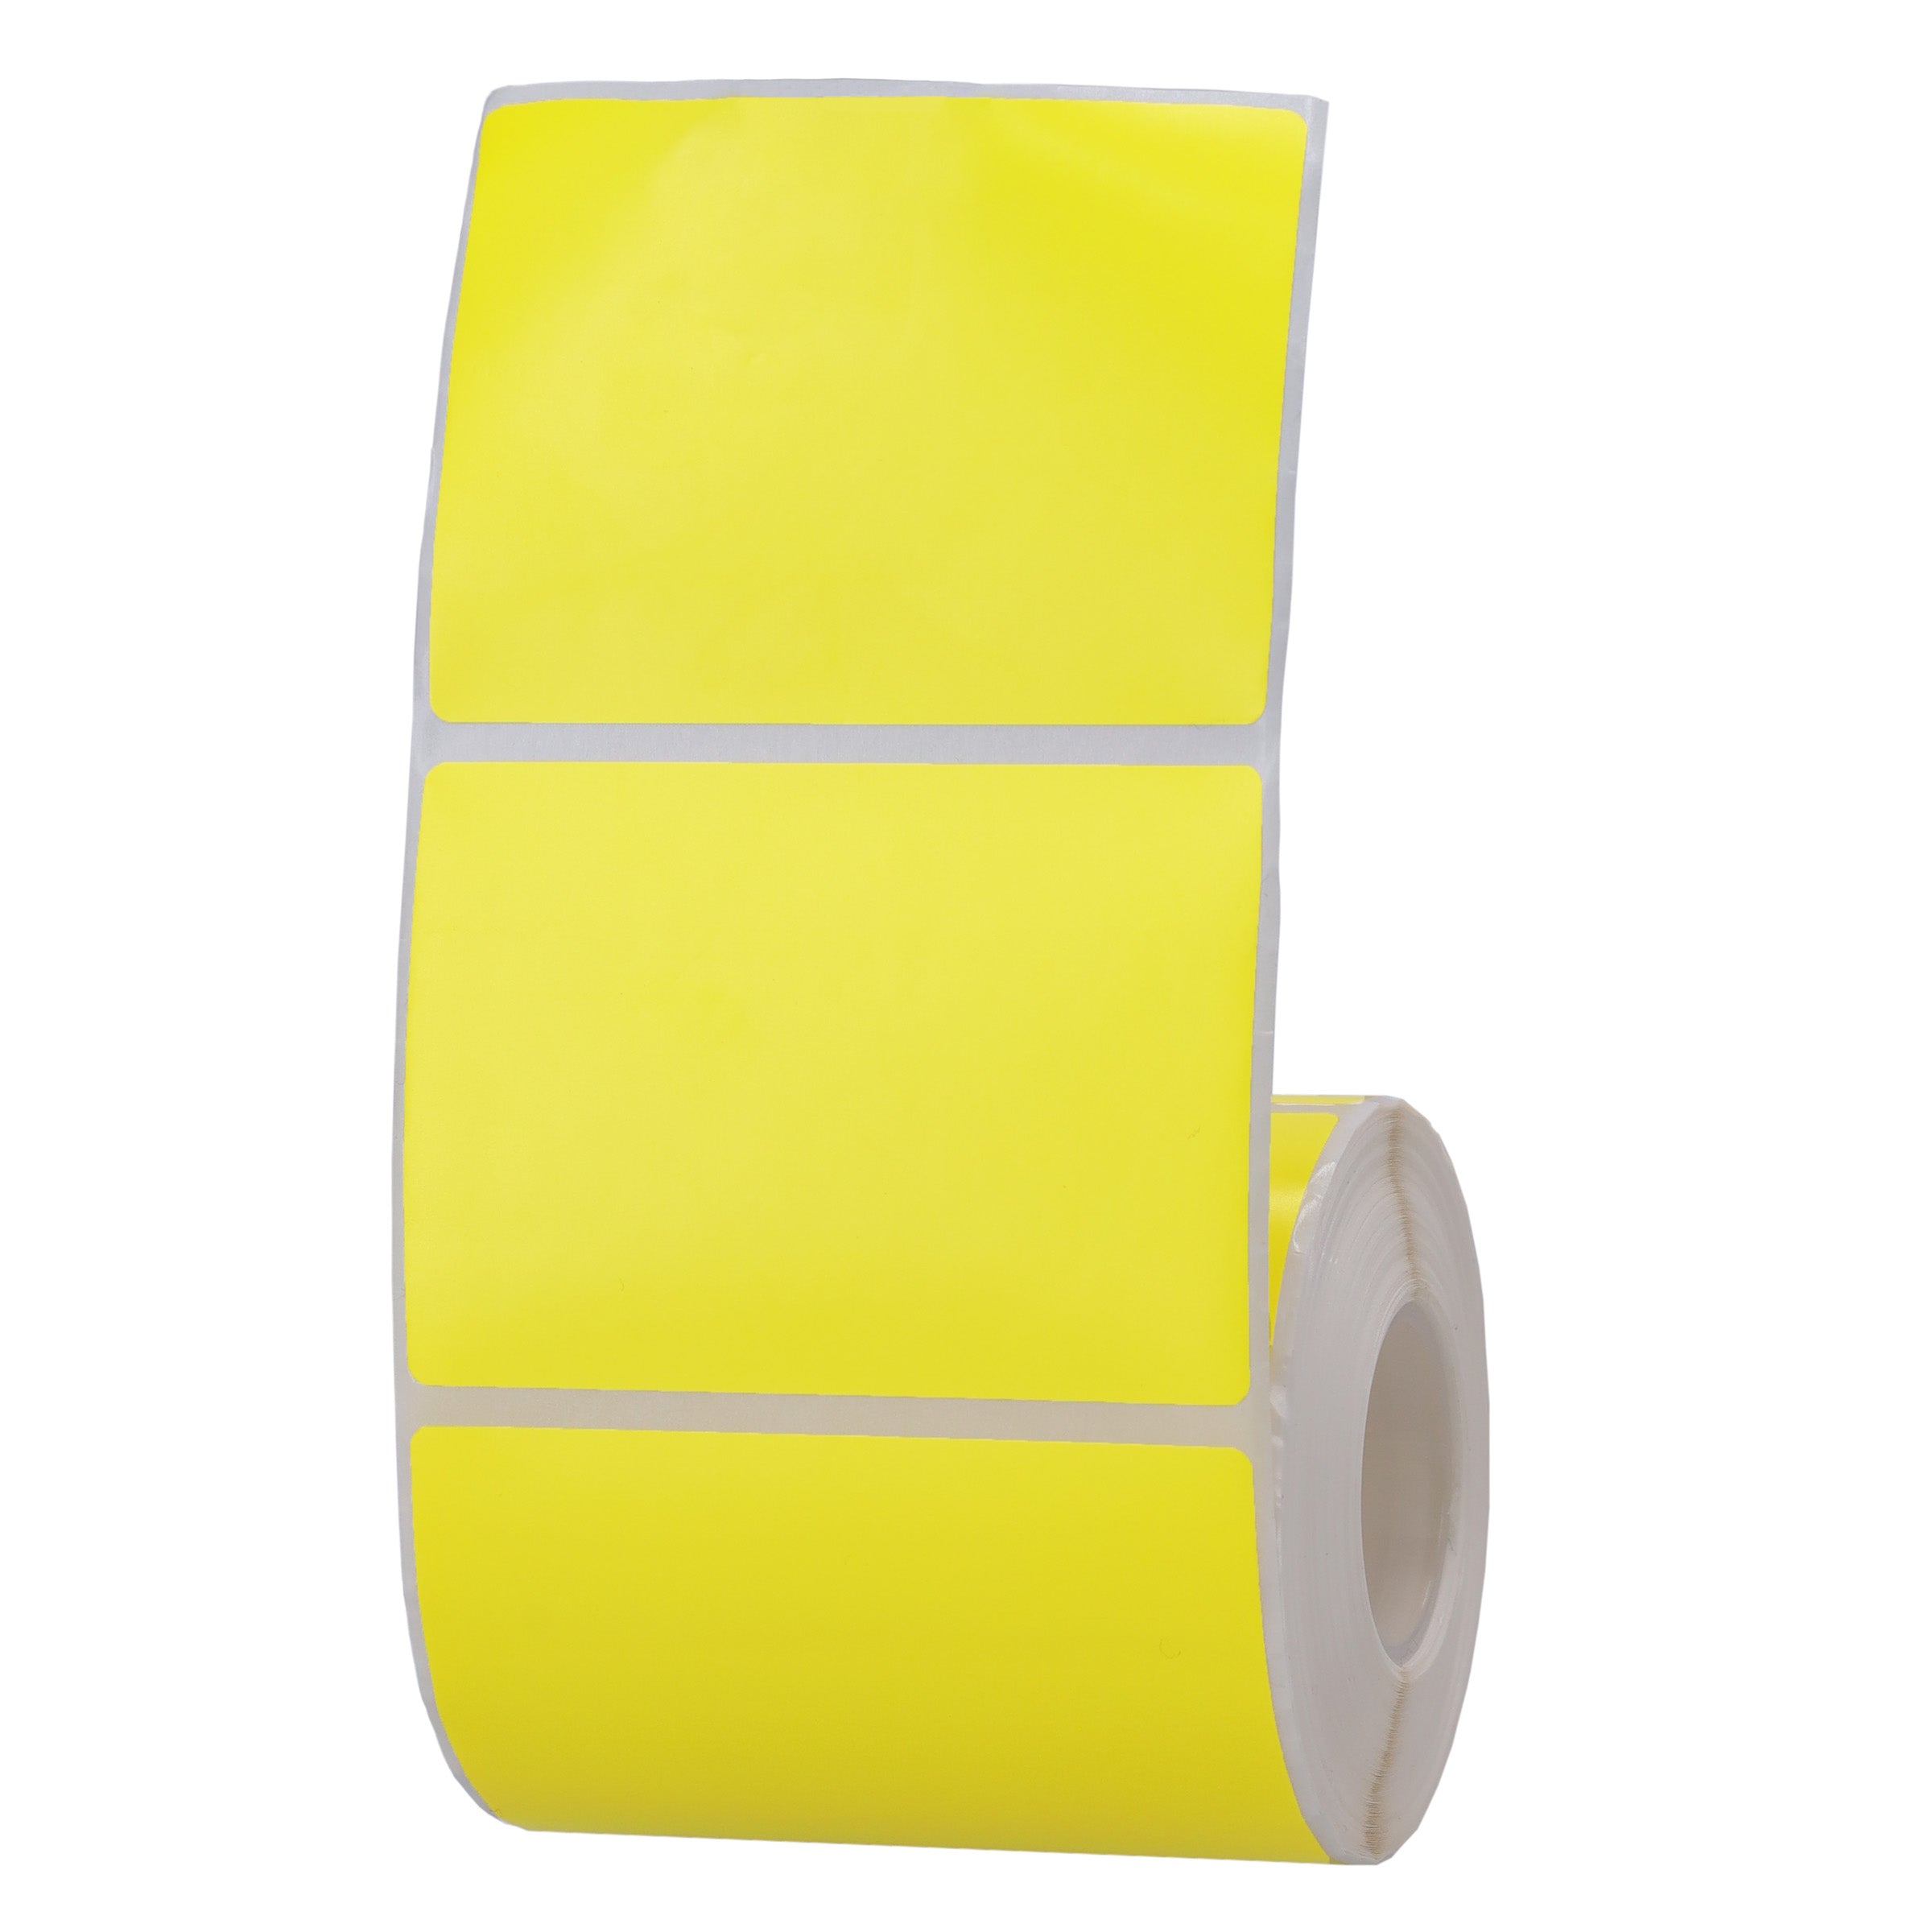 NB480 - NIIMBOT - Z401 ONLY - P70*50 - 300 THERMAL TRANSFER LABELS - YELLOW